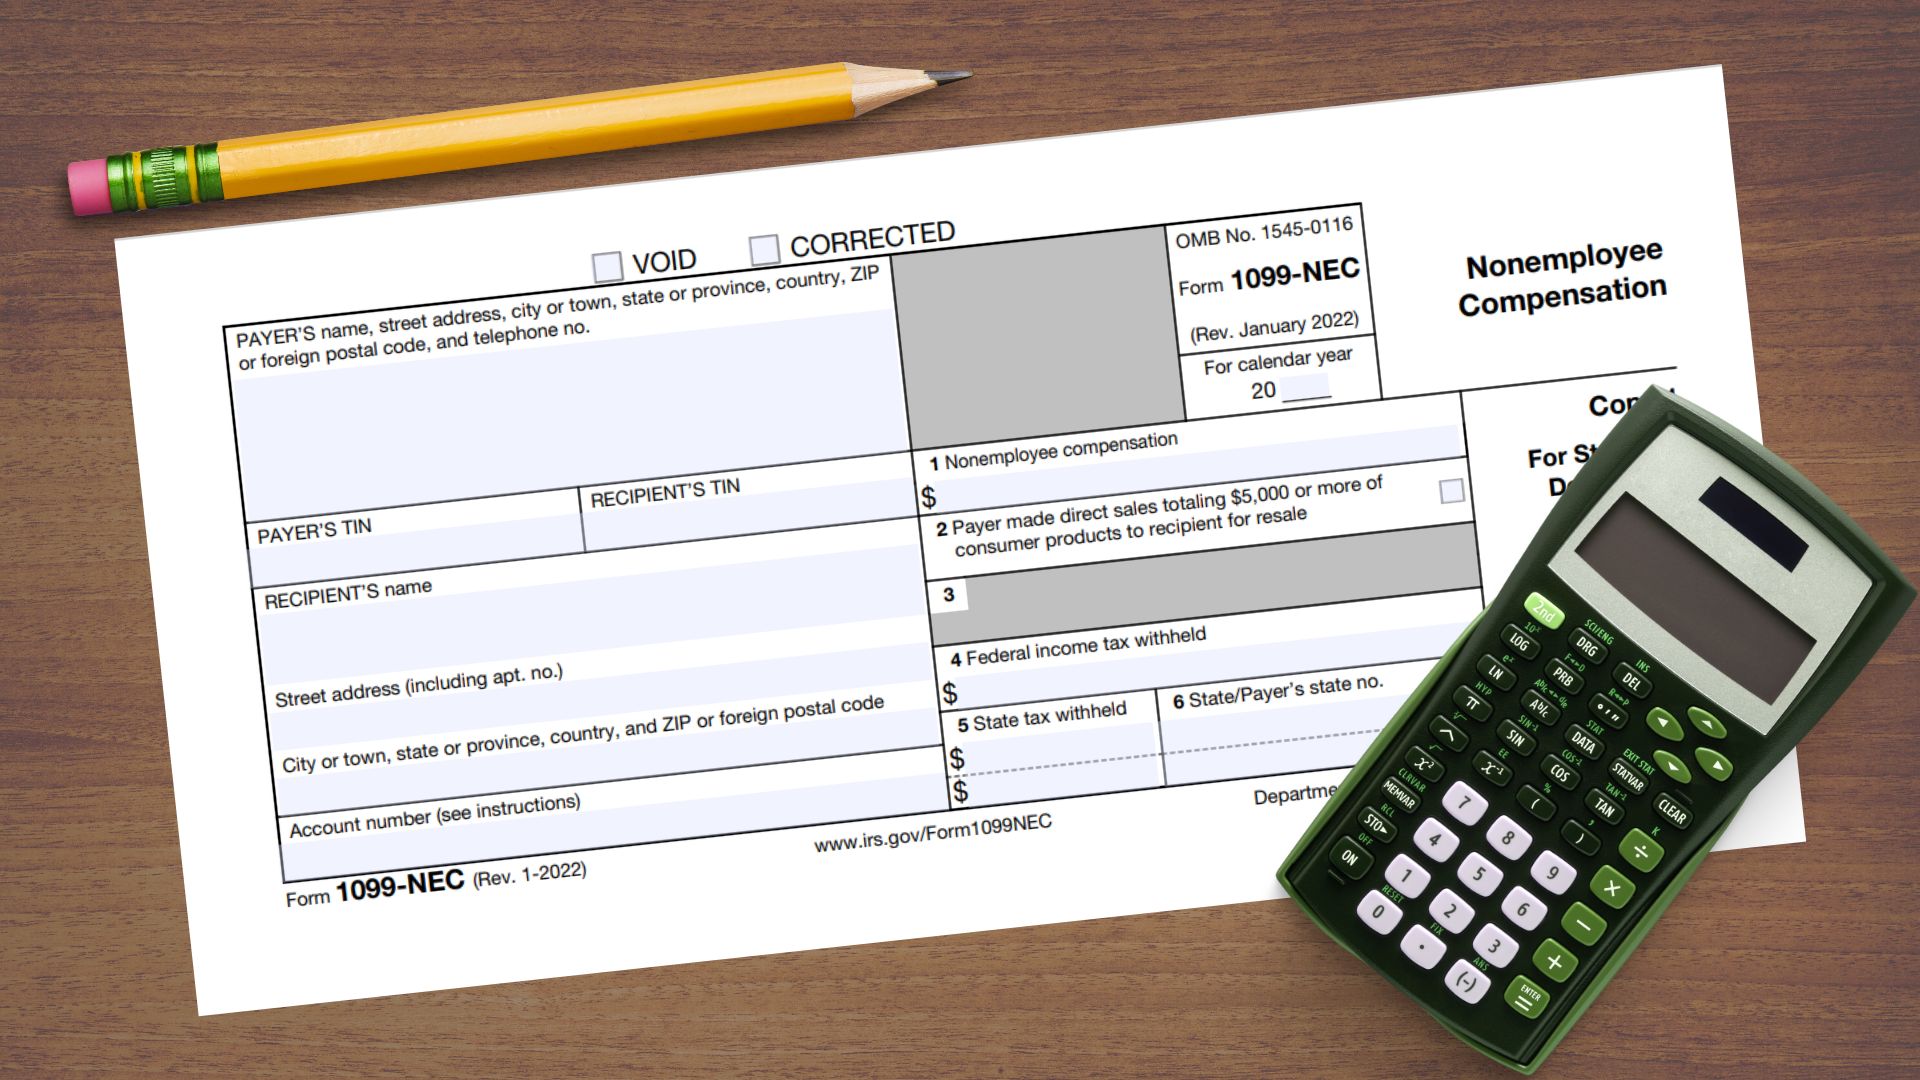 The copy of the 1099-NEC tax form for nonemployee compensation with the calculator and the pencil